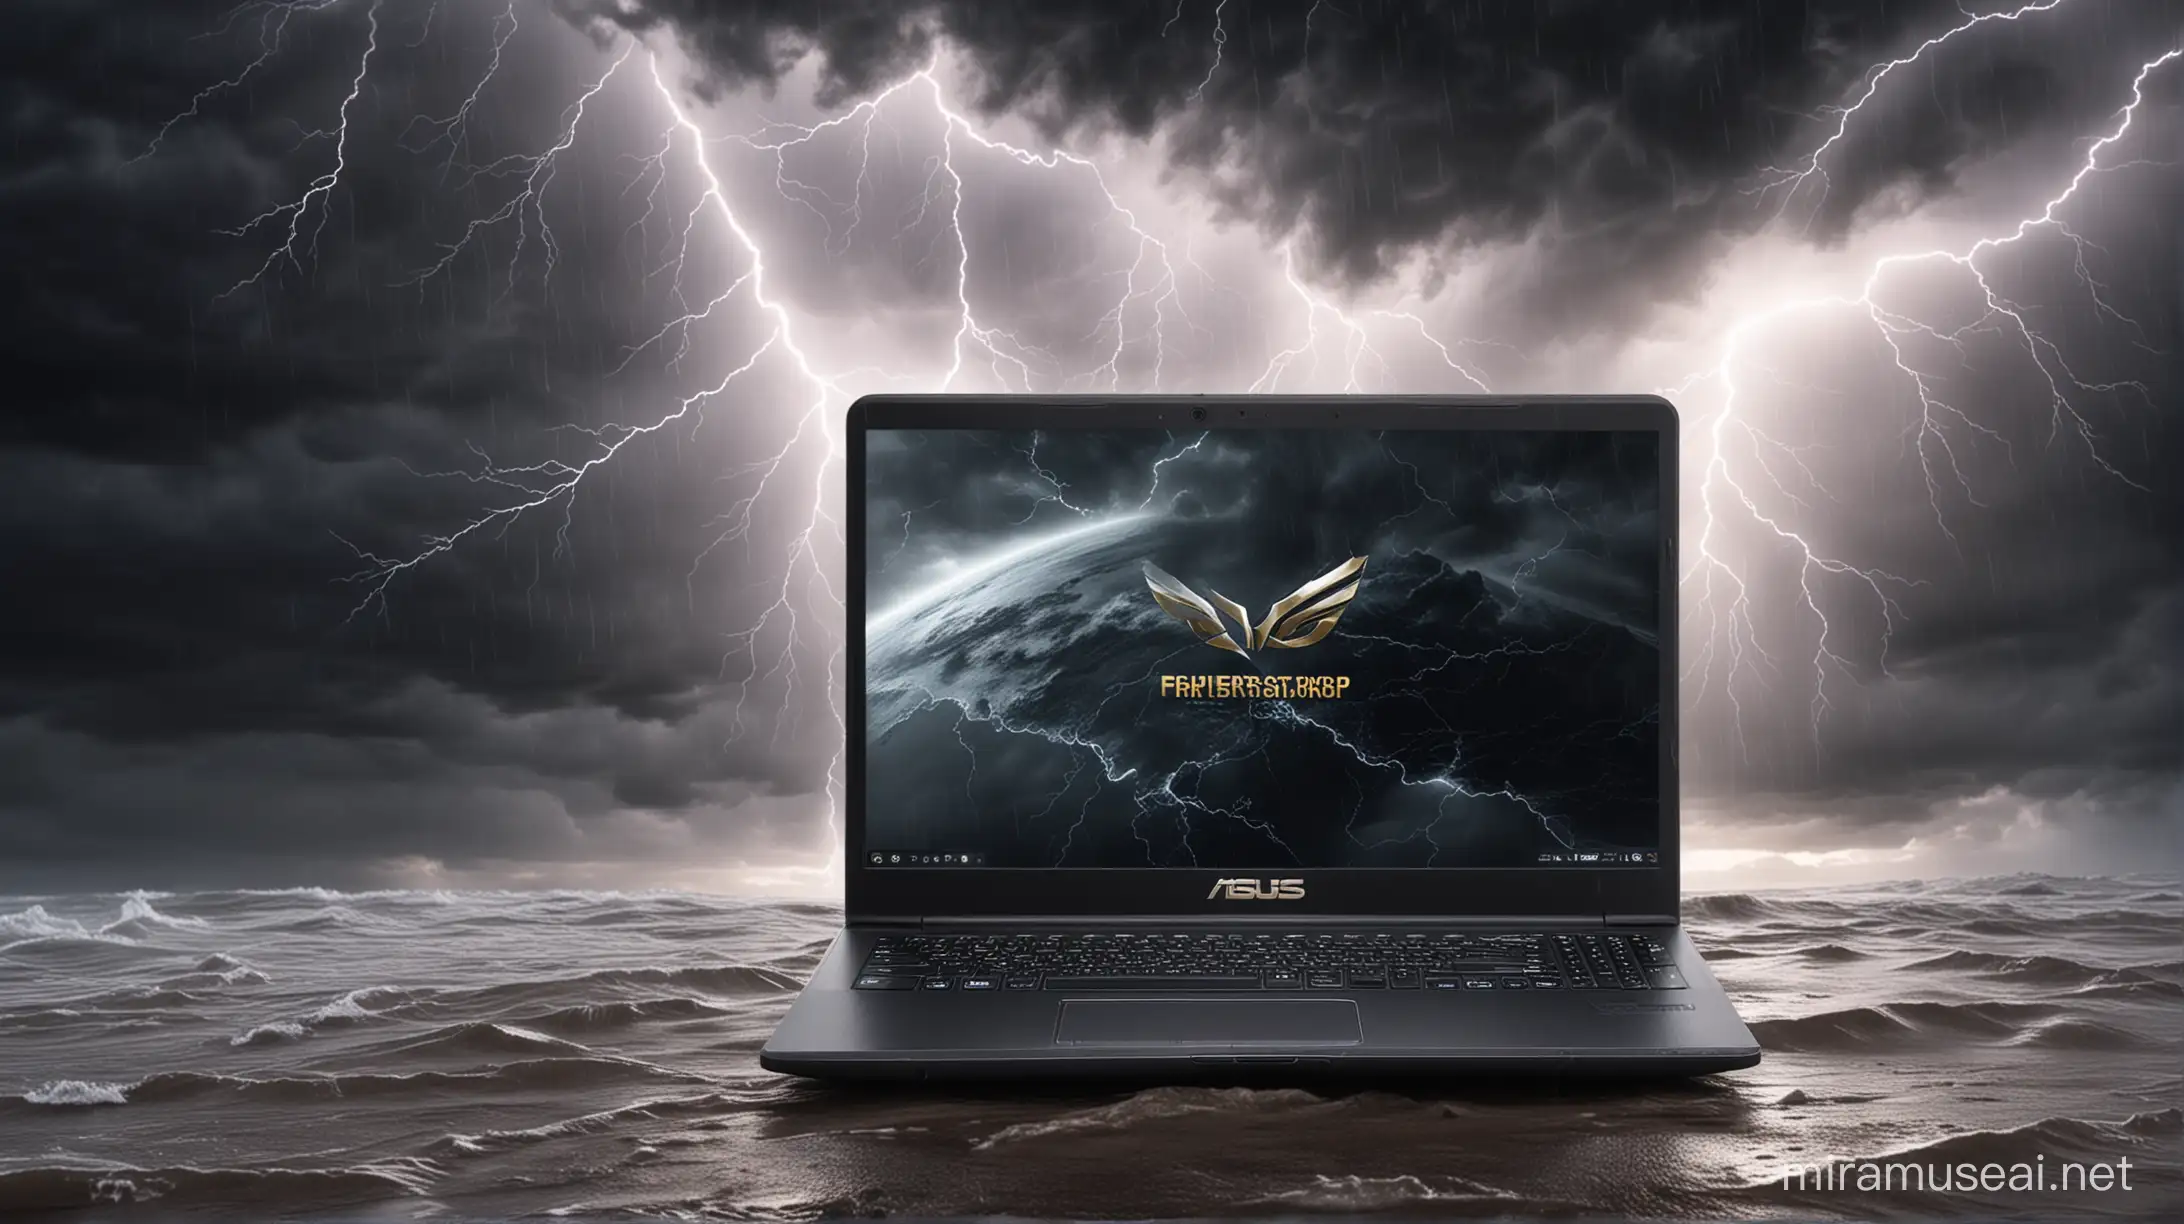 ASUS Laptop Braving the Storm Immersive Marketing Campaign Image